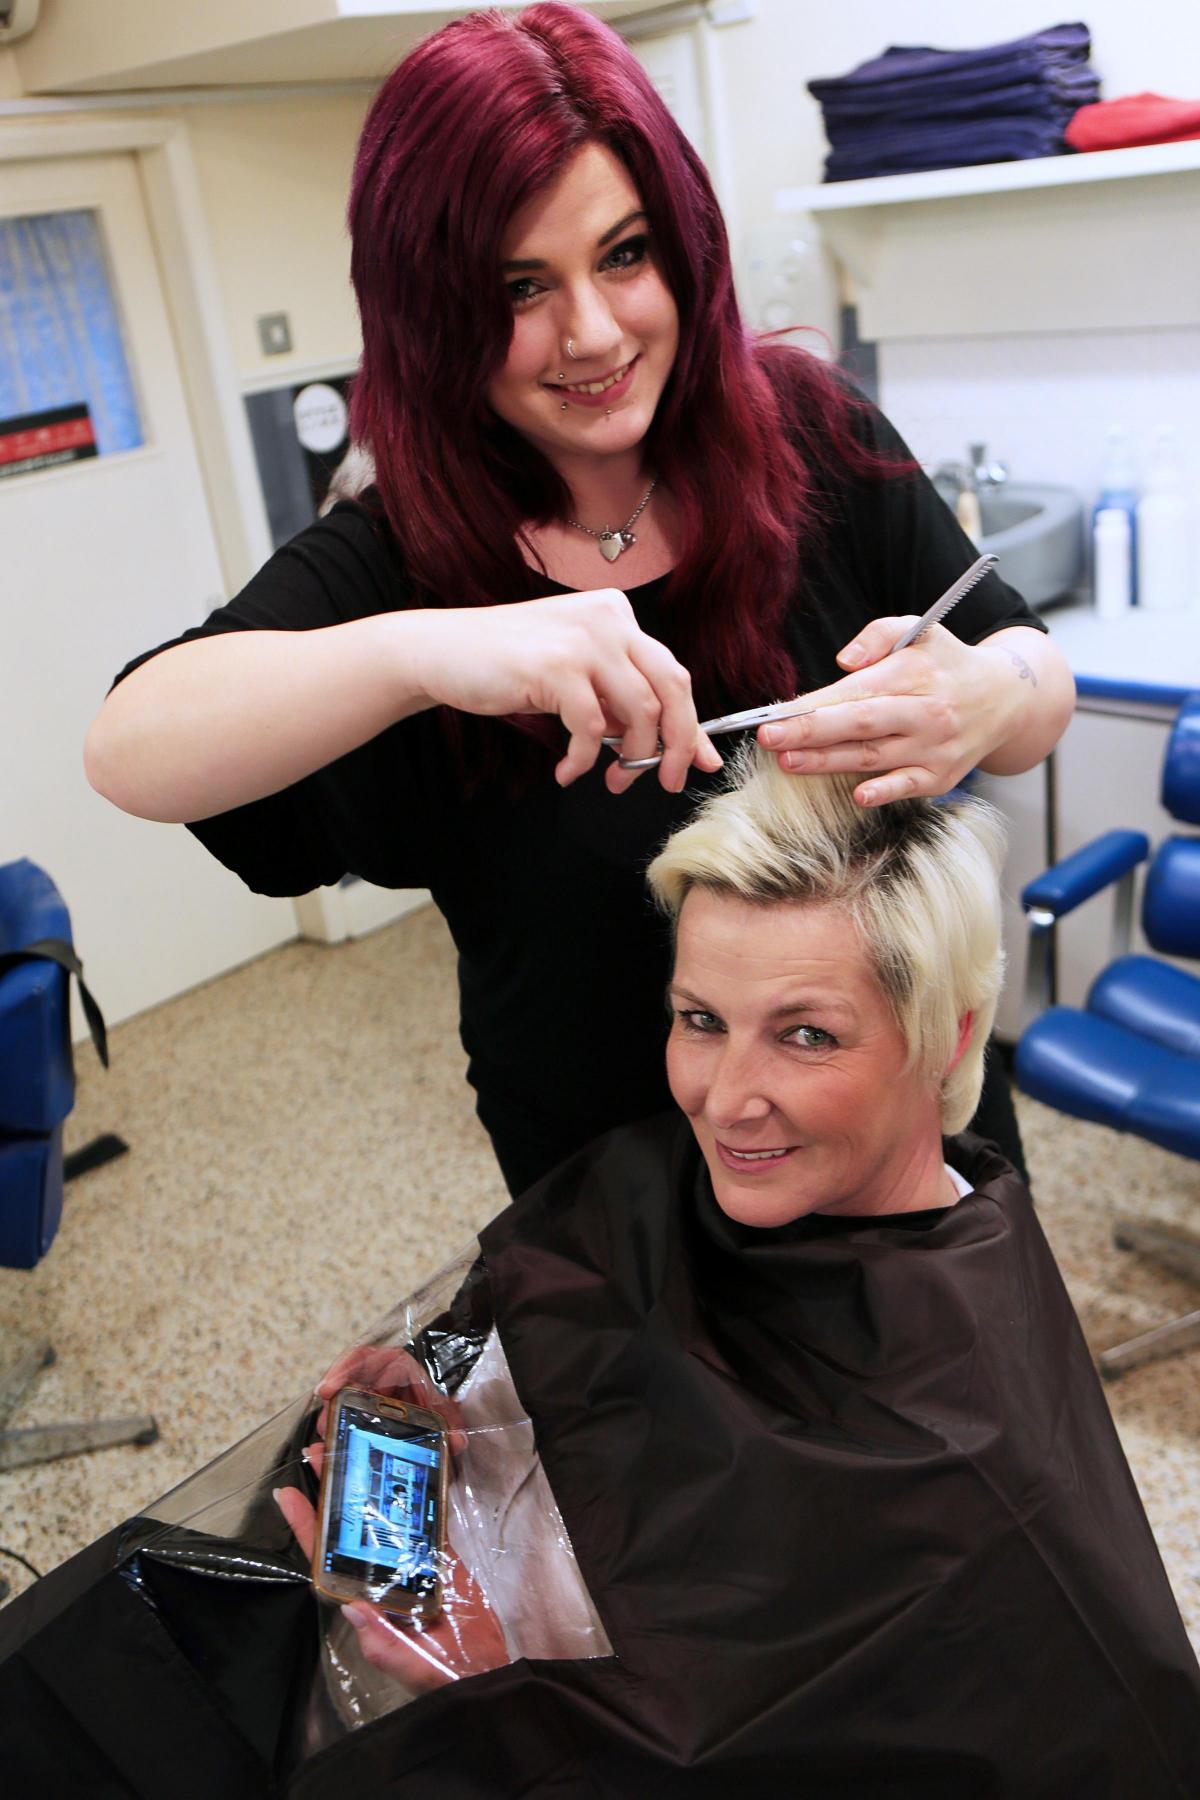 Trim Phone Darlington Hairdresser Moves With The Times With